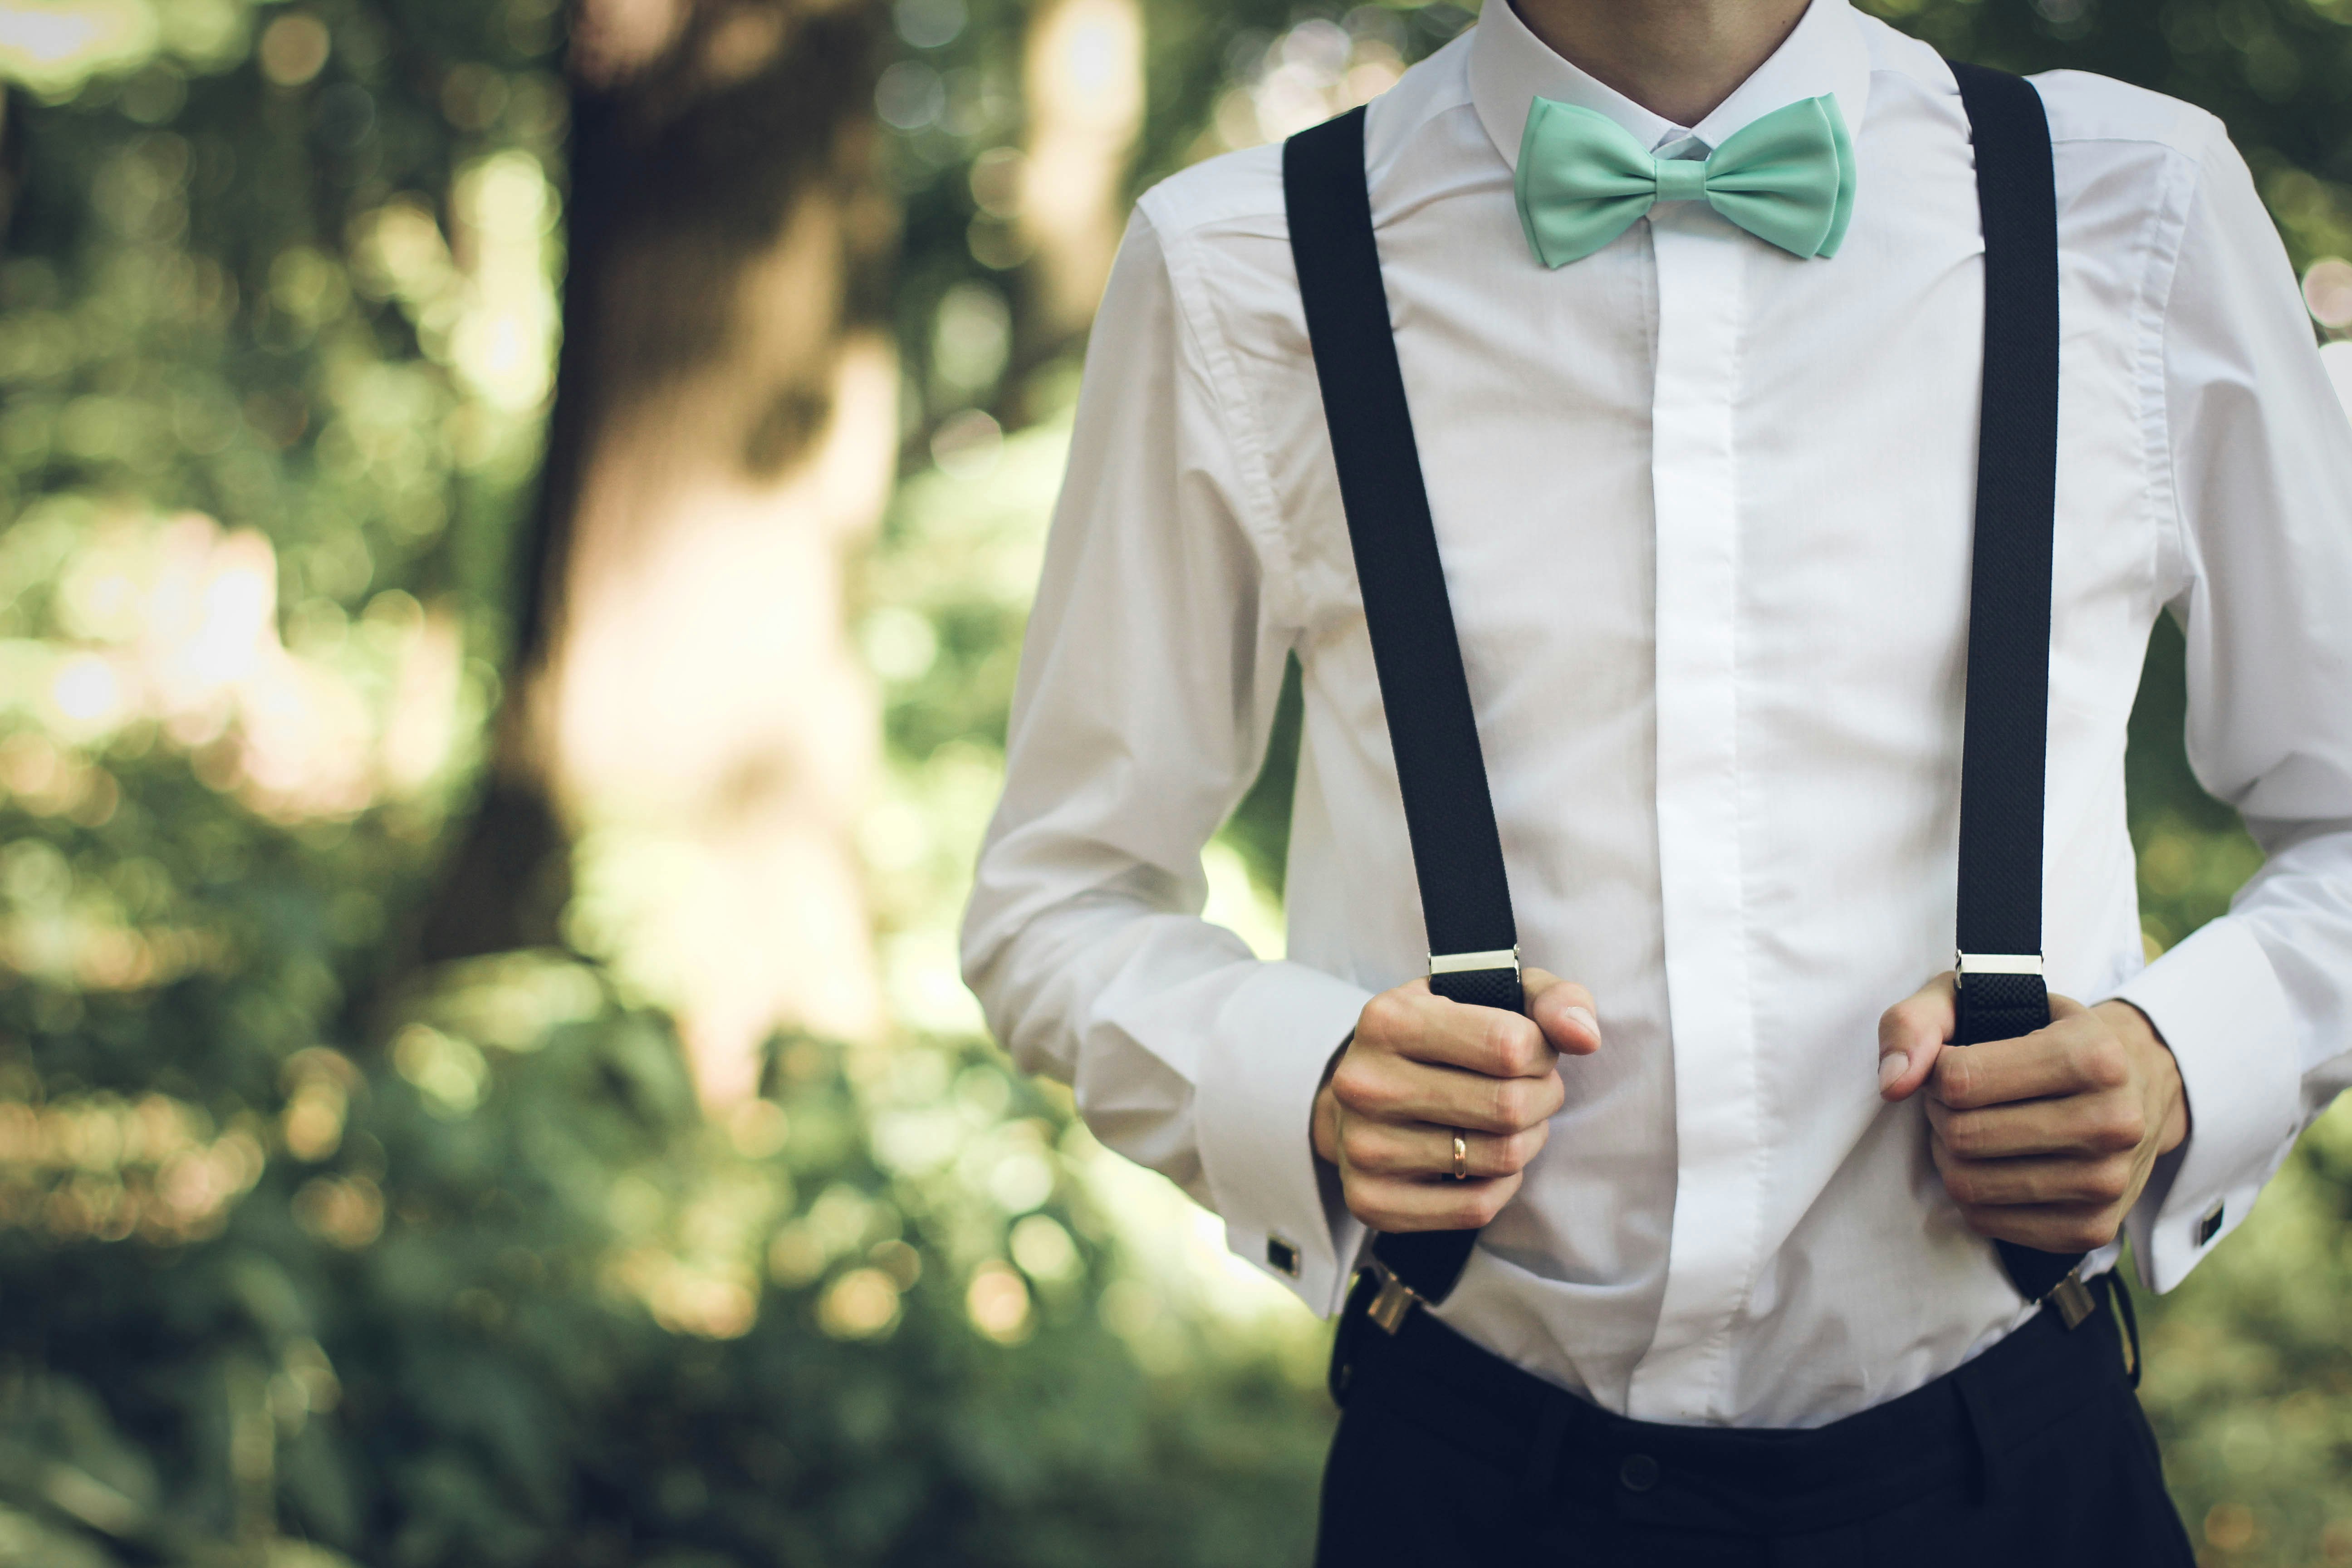 Wearing suspenders and bowtie